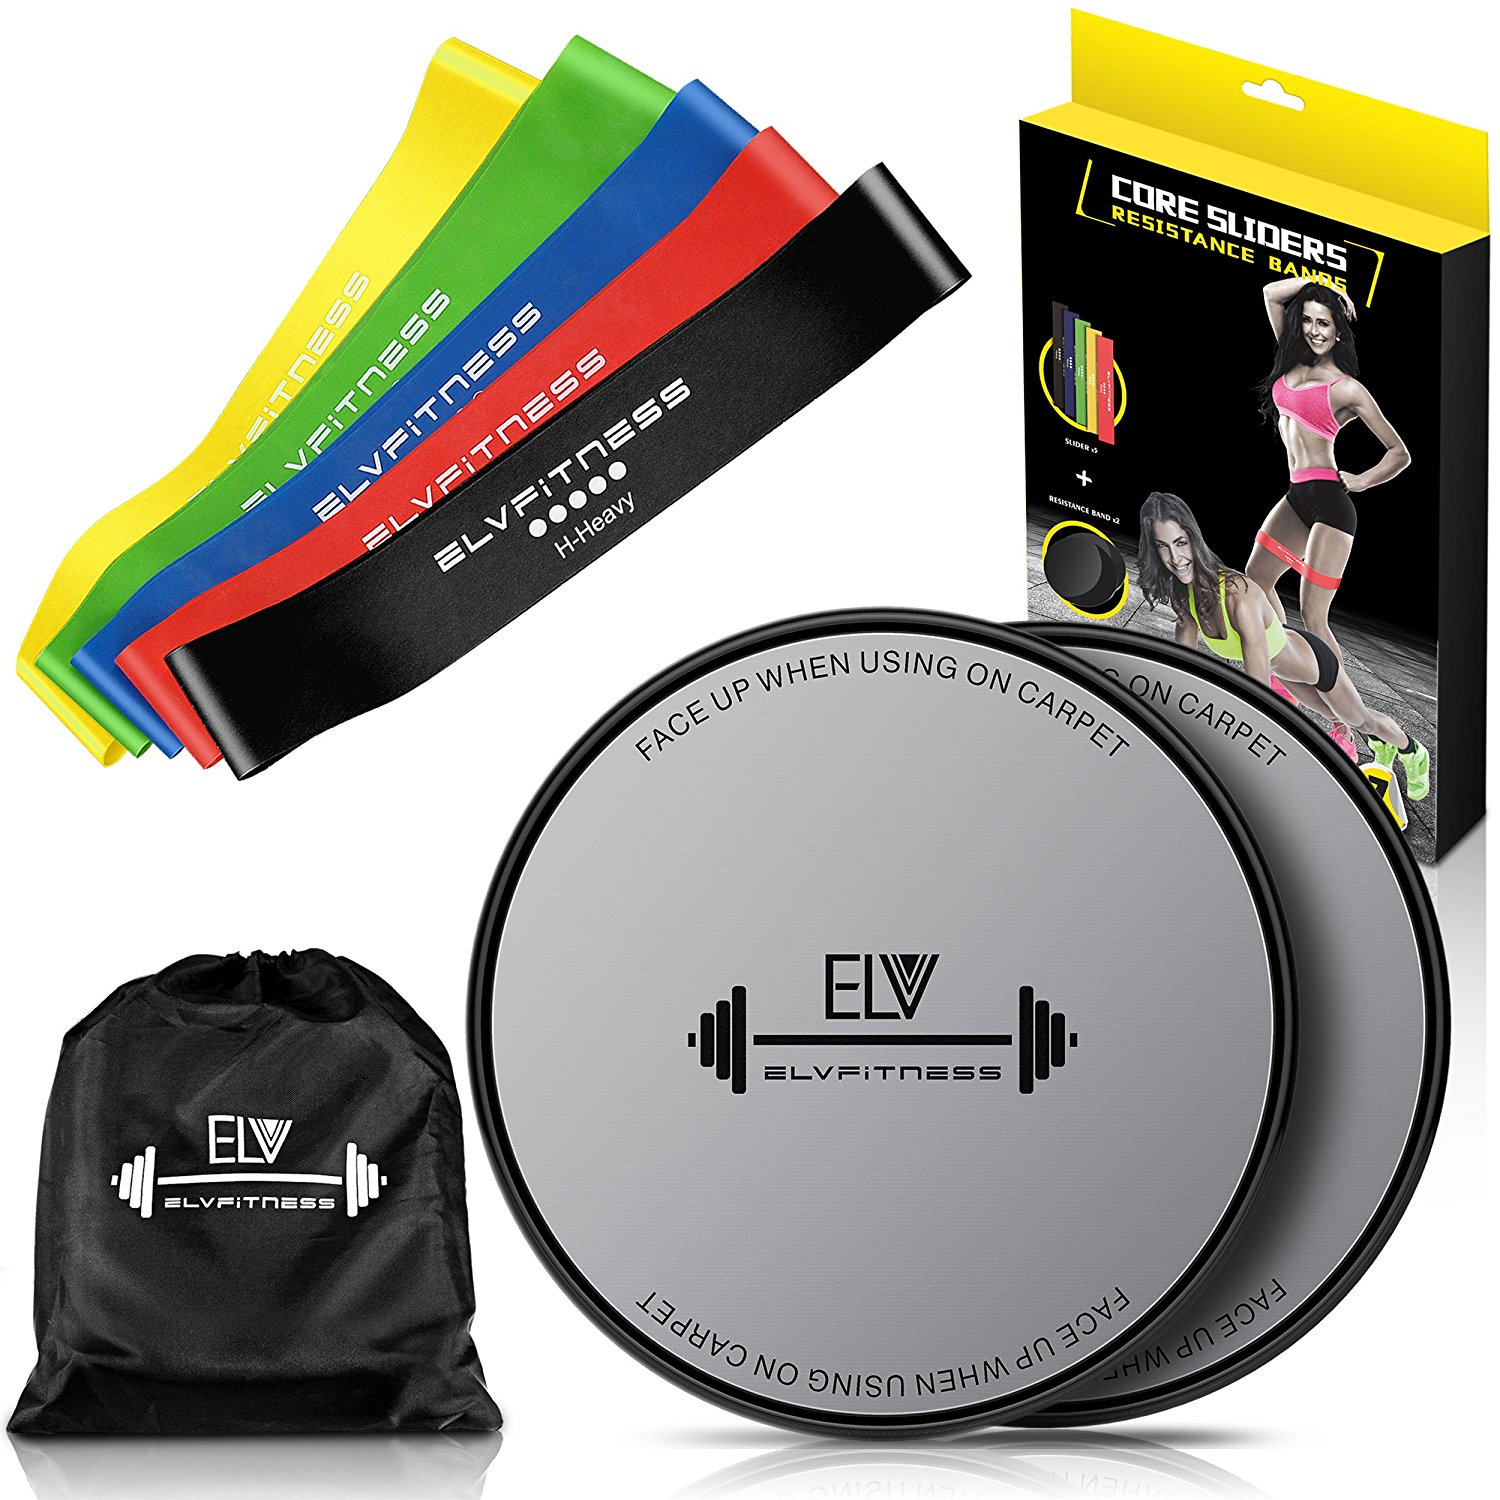 ELV Rubber Exercise Band Fitness Set with Sliders |5 Bands + 2 Discs| - image 1 of 7